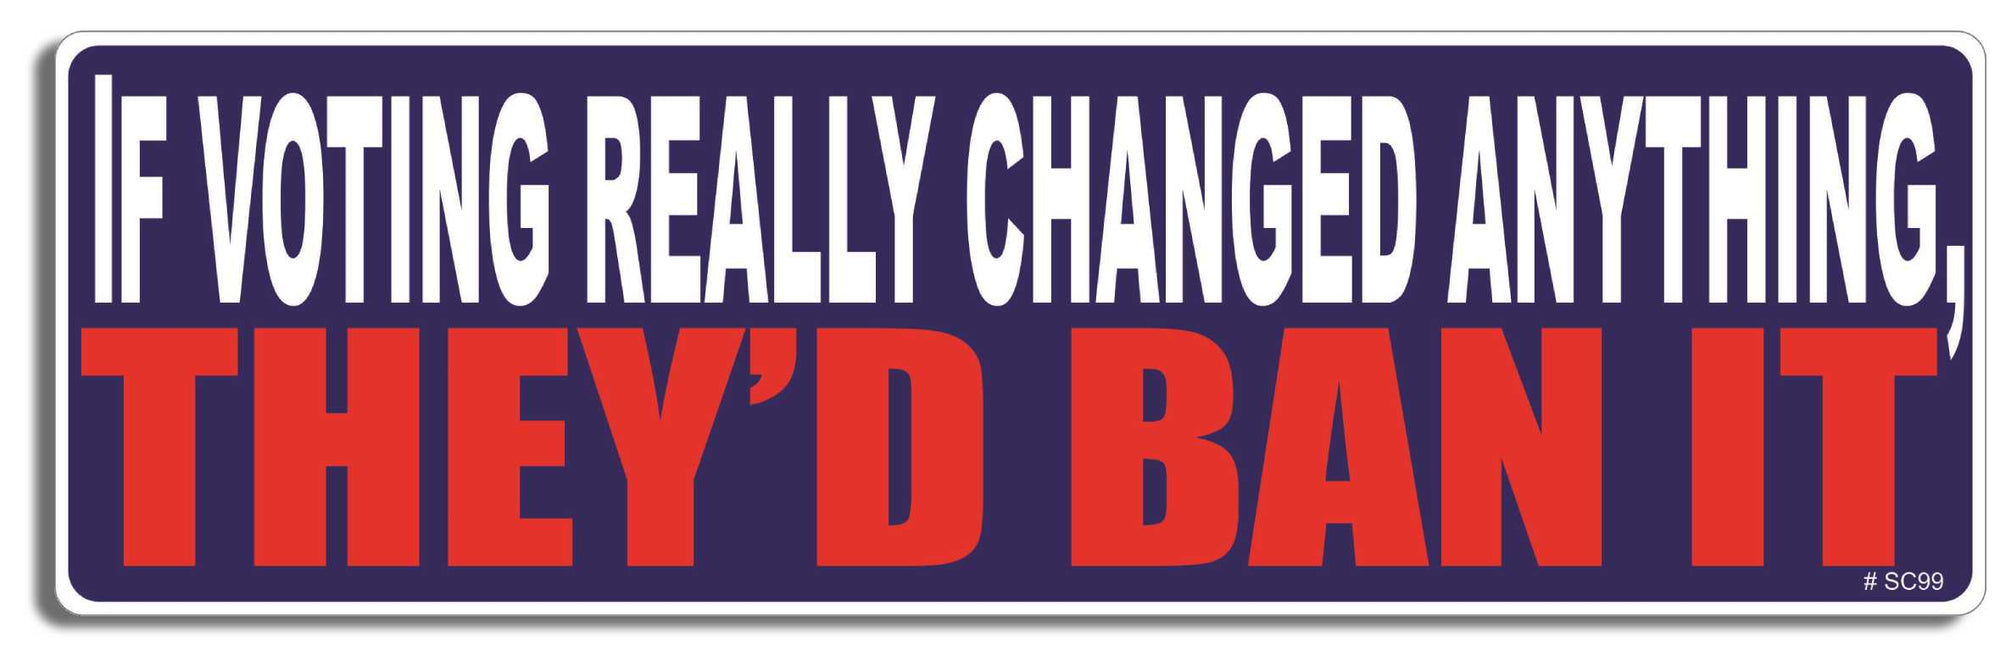 If voting really changed anything, they'd ban it - 3" x 10" Bumper Sticker--Car Magnet- -  Decal Bumper Sticker-political Bumper Sticker Car Magnet If voting really changed anything,-  Decal for carsconservative, liberal, Political